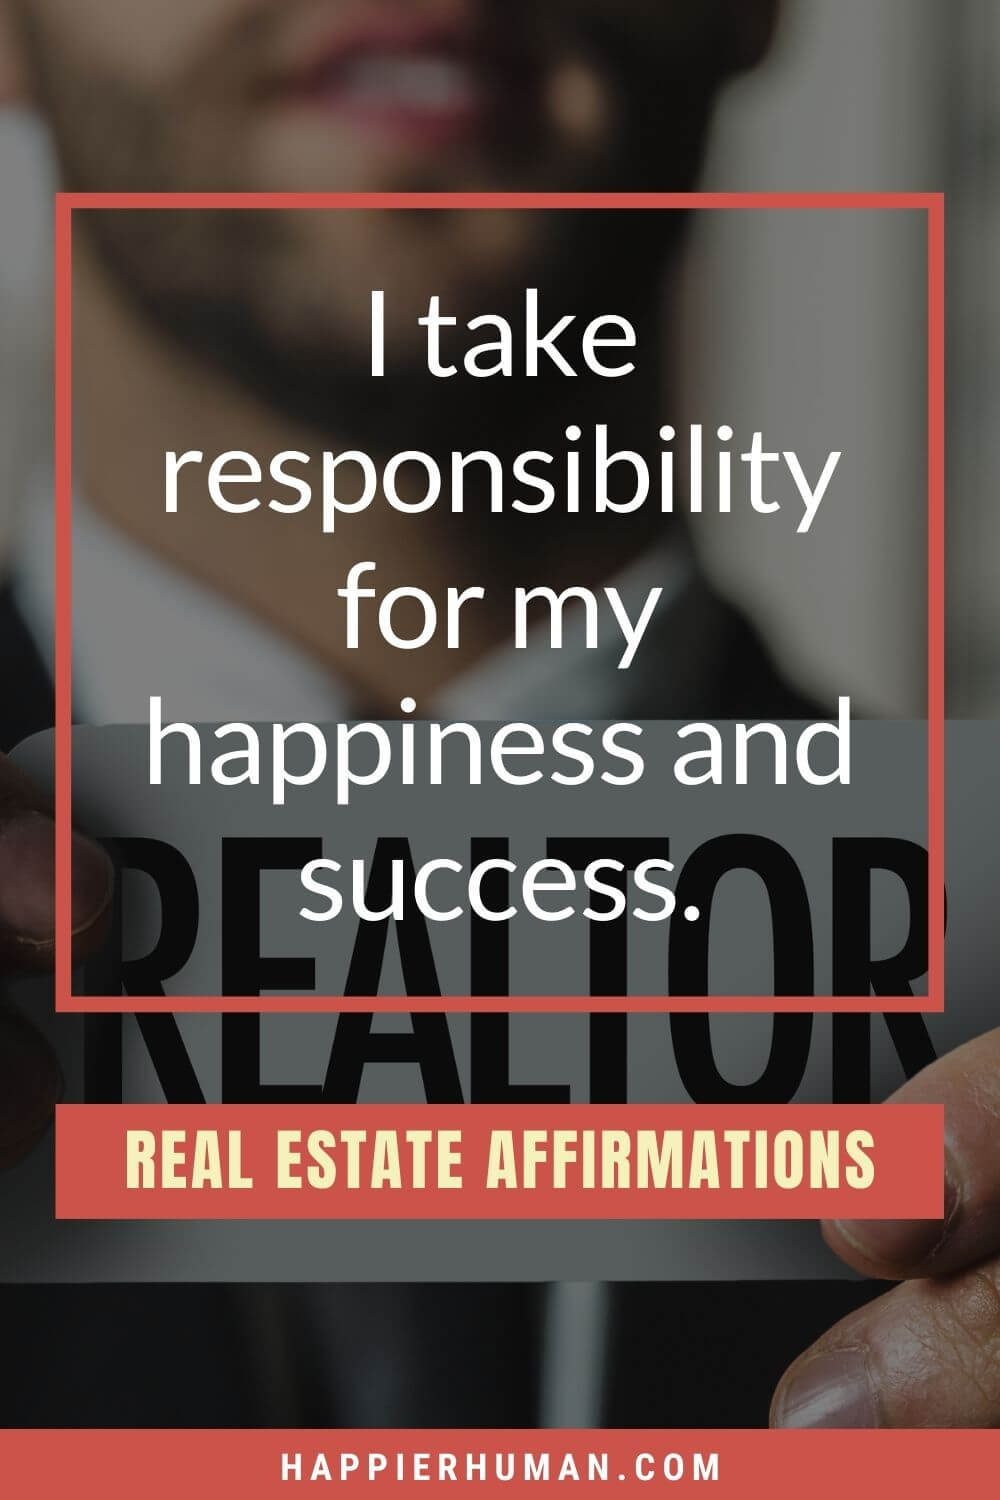 Real Estate Affirmations - I take responsibility for my happiness and success. | daily affirmations | real estate affirmations youtube | real estate affirmations audio